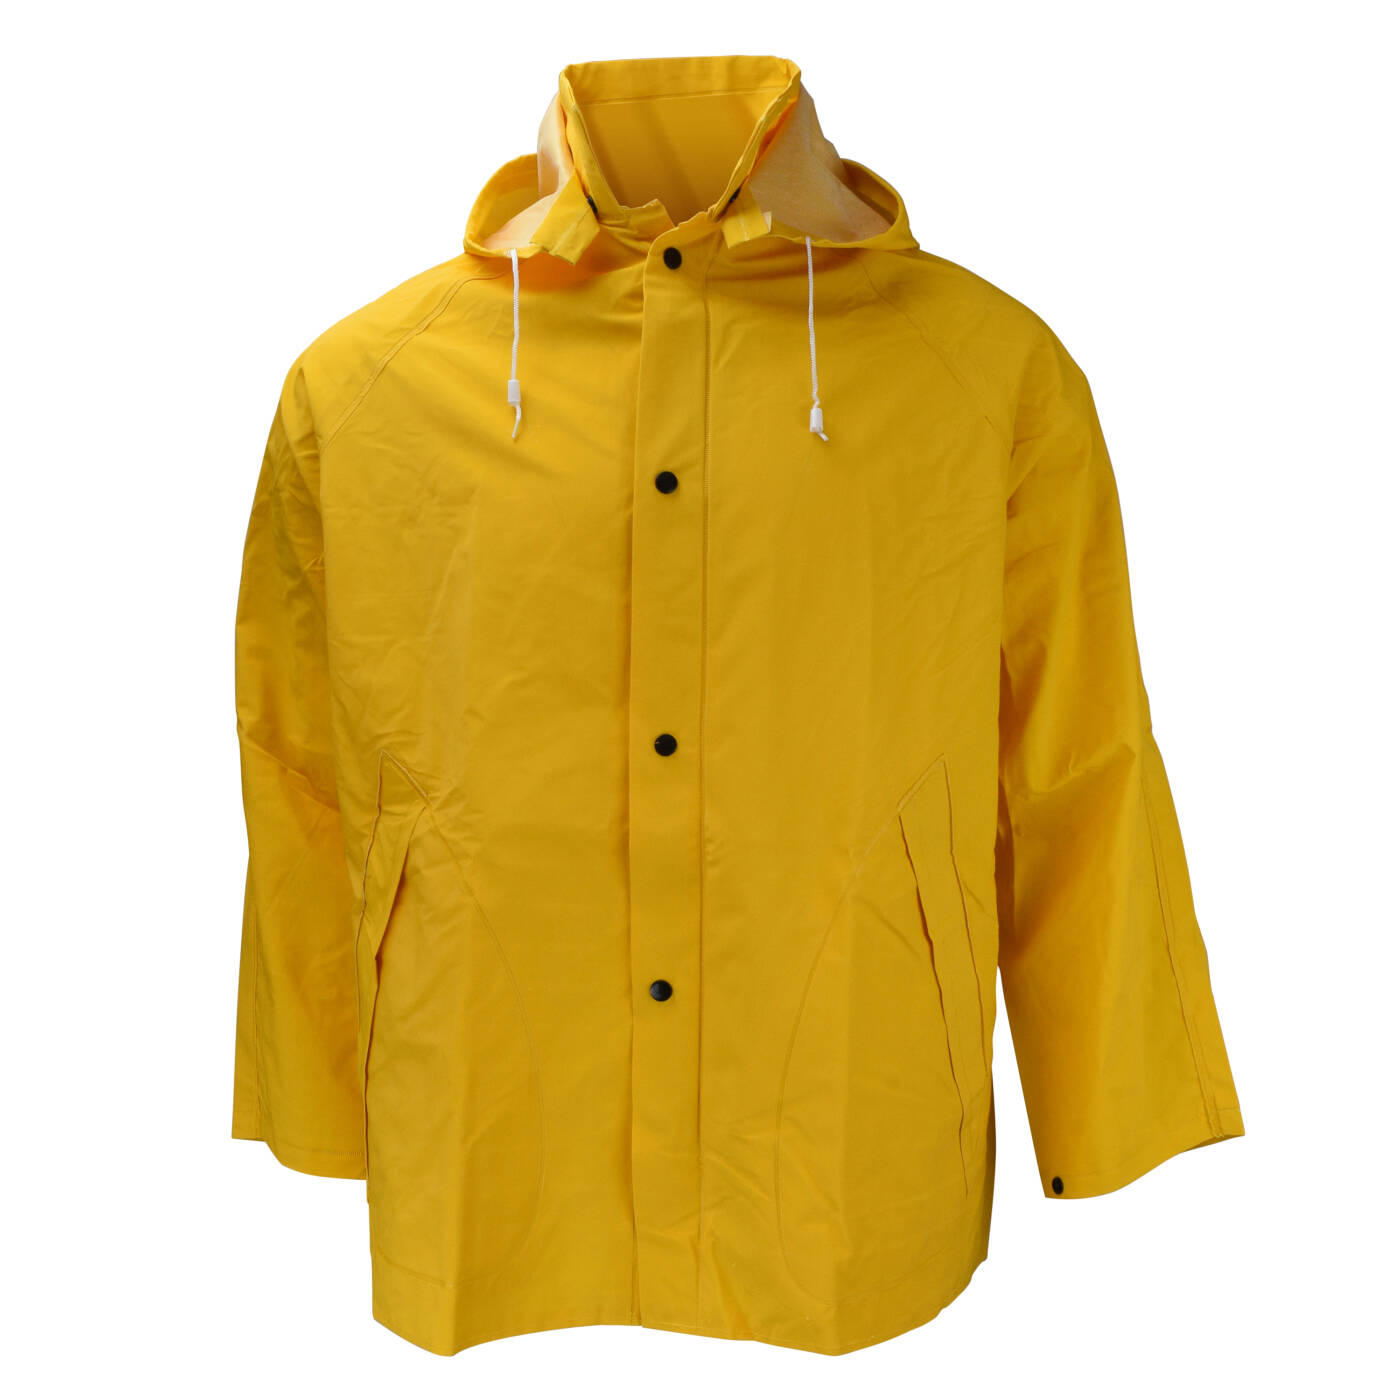 Economy Series Jacket with Attached Hood - Bullzeye